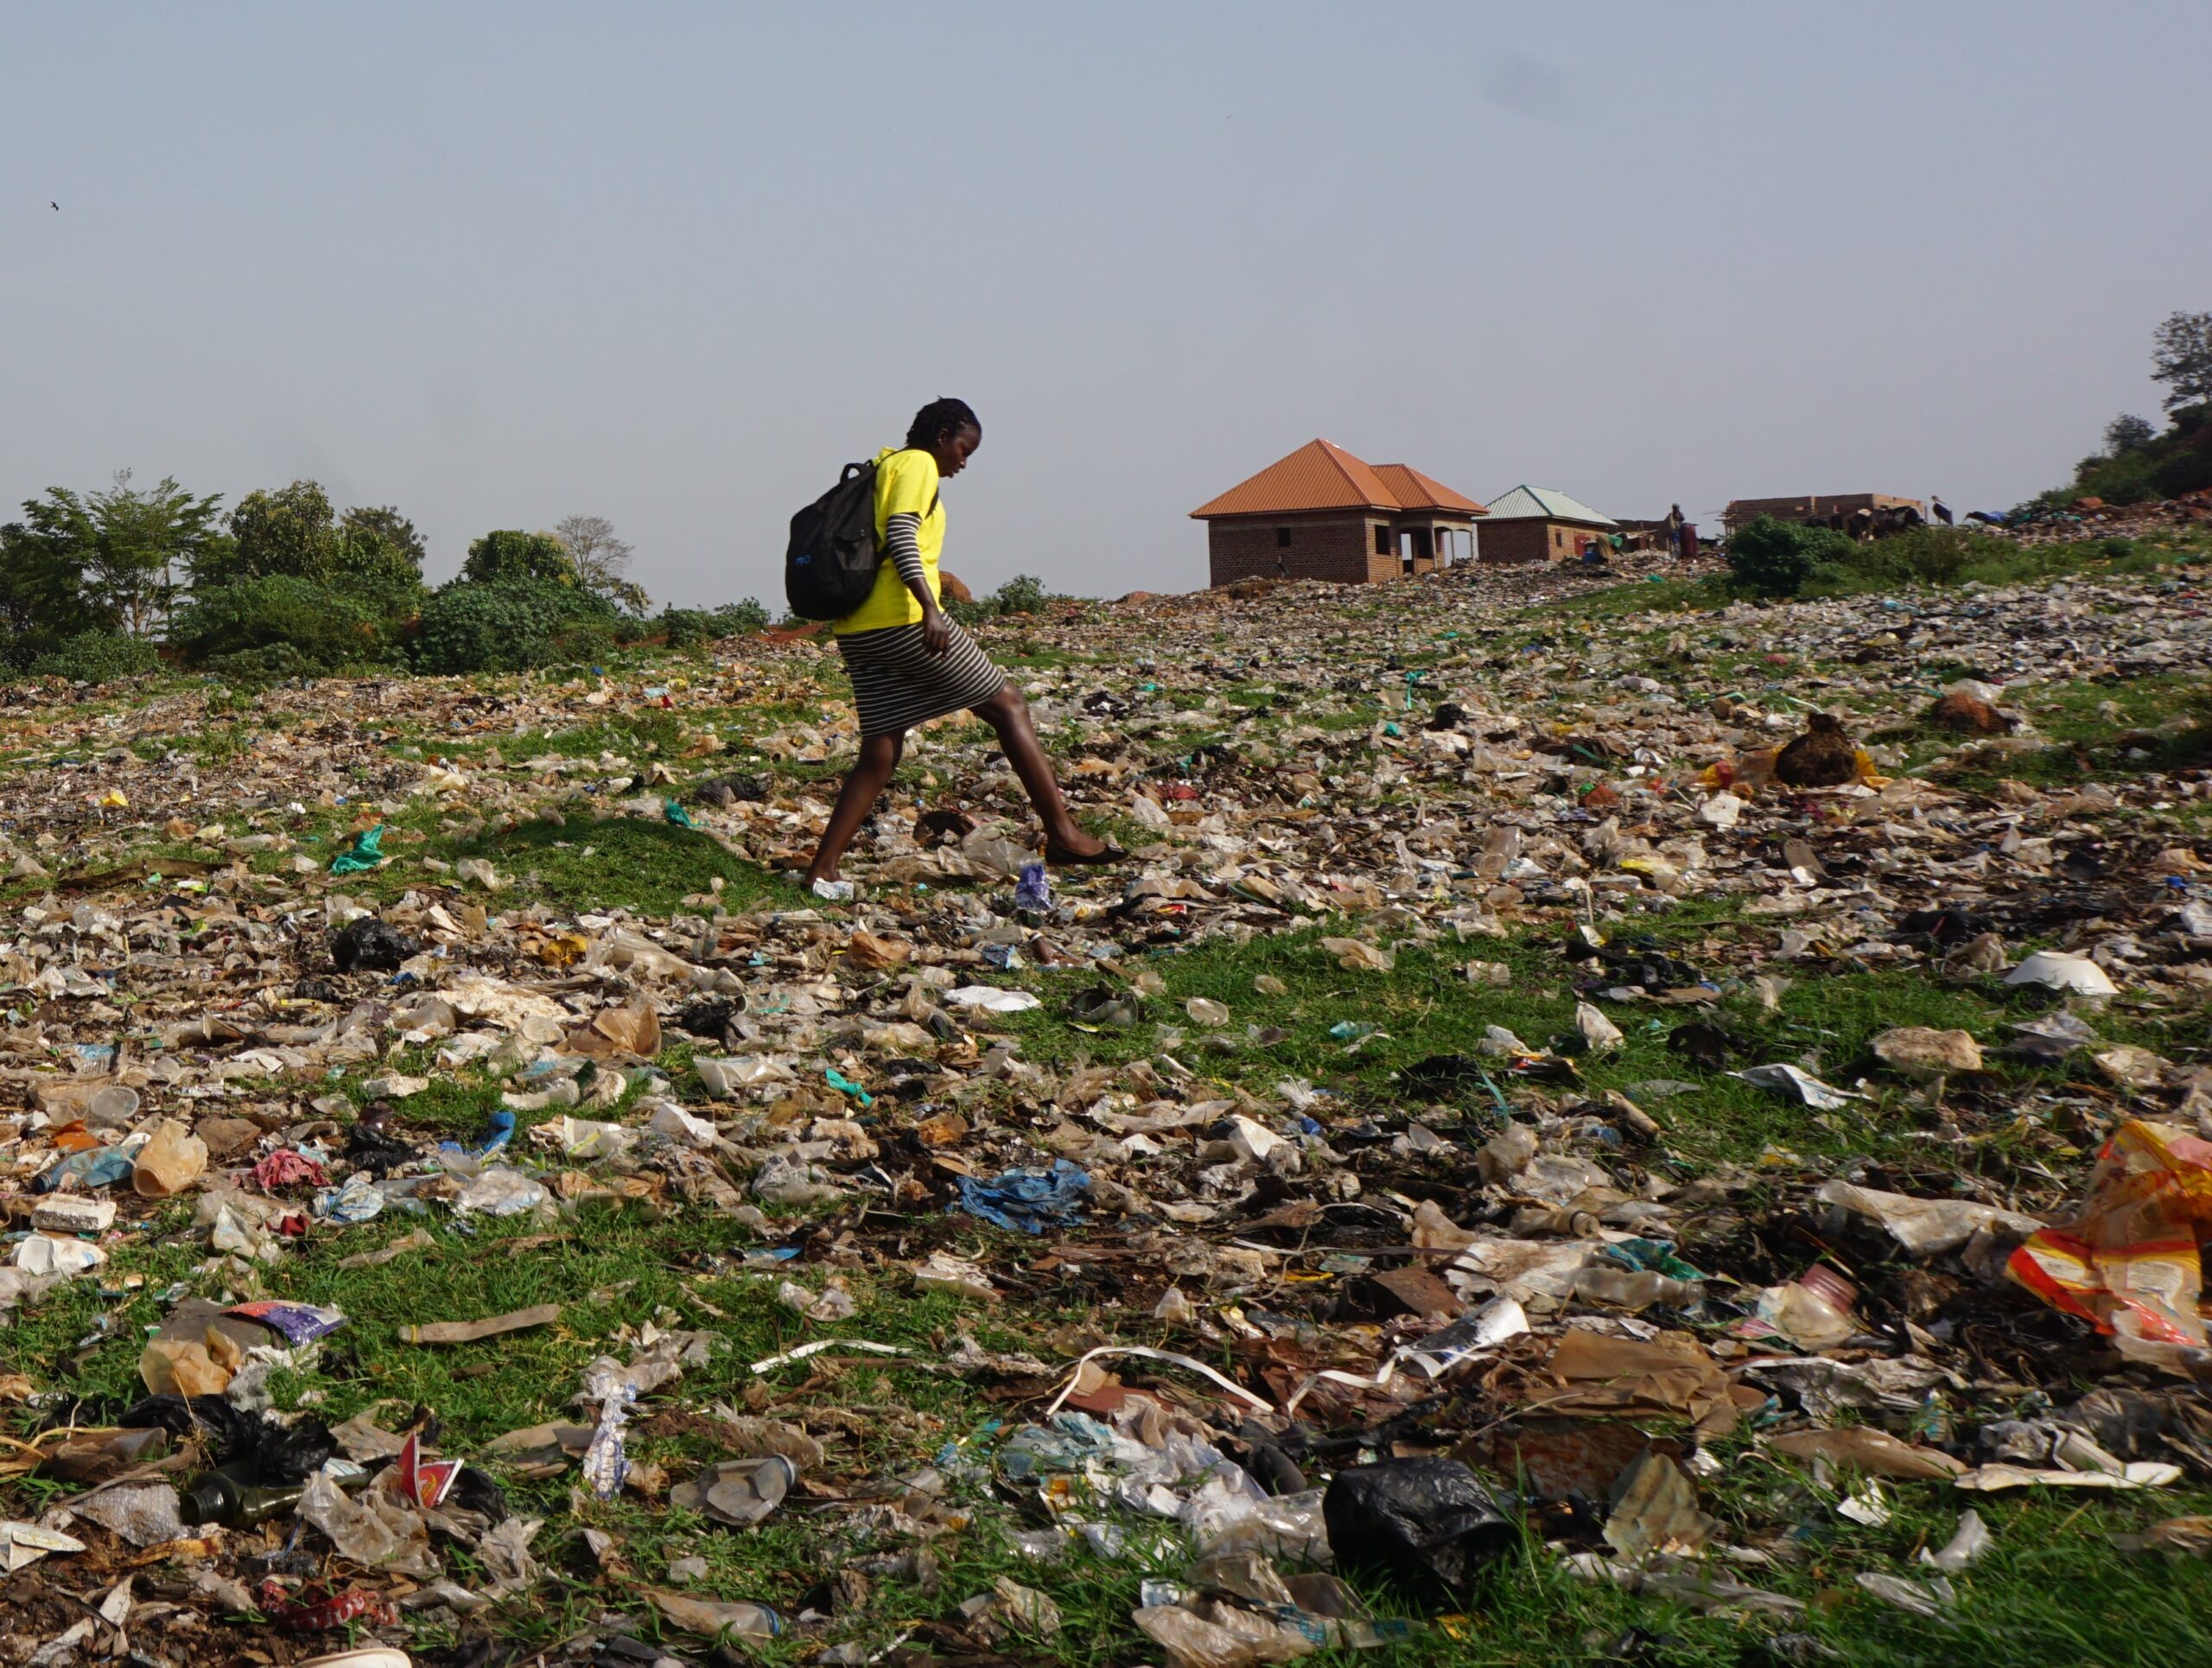 A S.A.L.V.E worked walking across a huge pile of rubbish